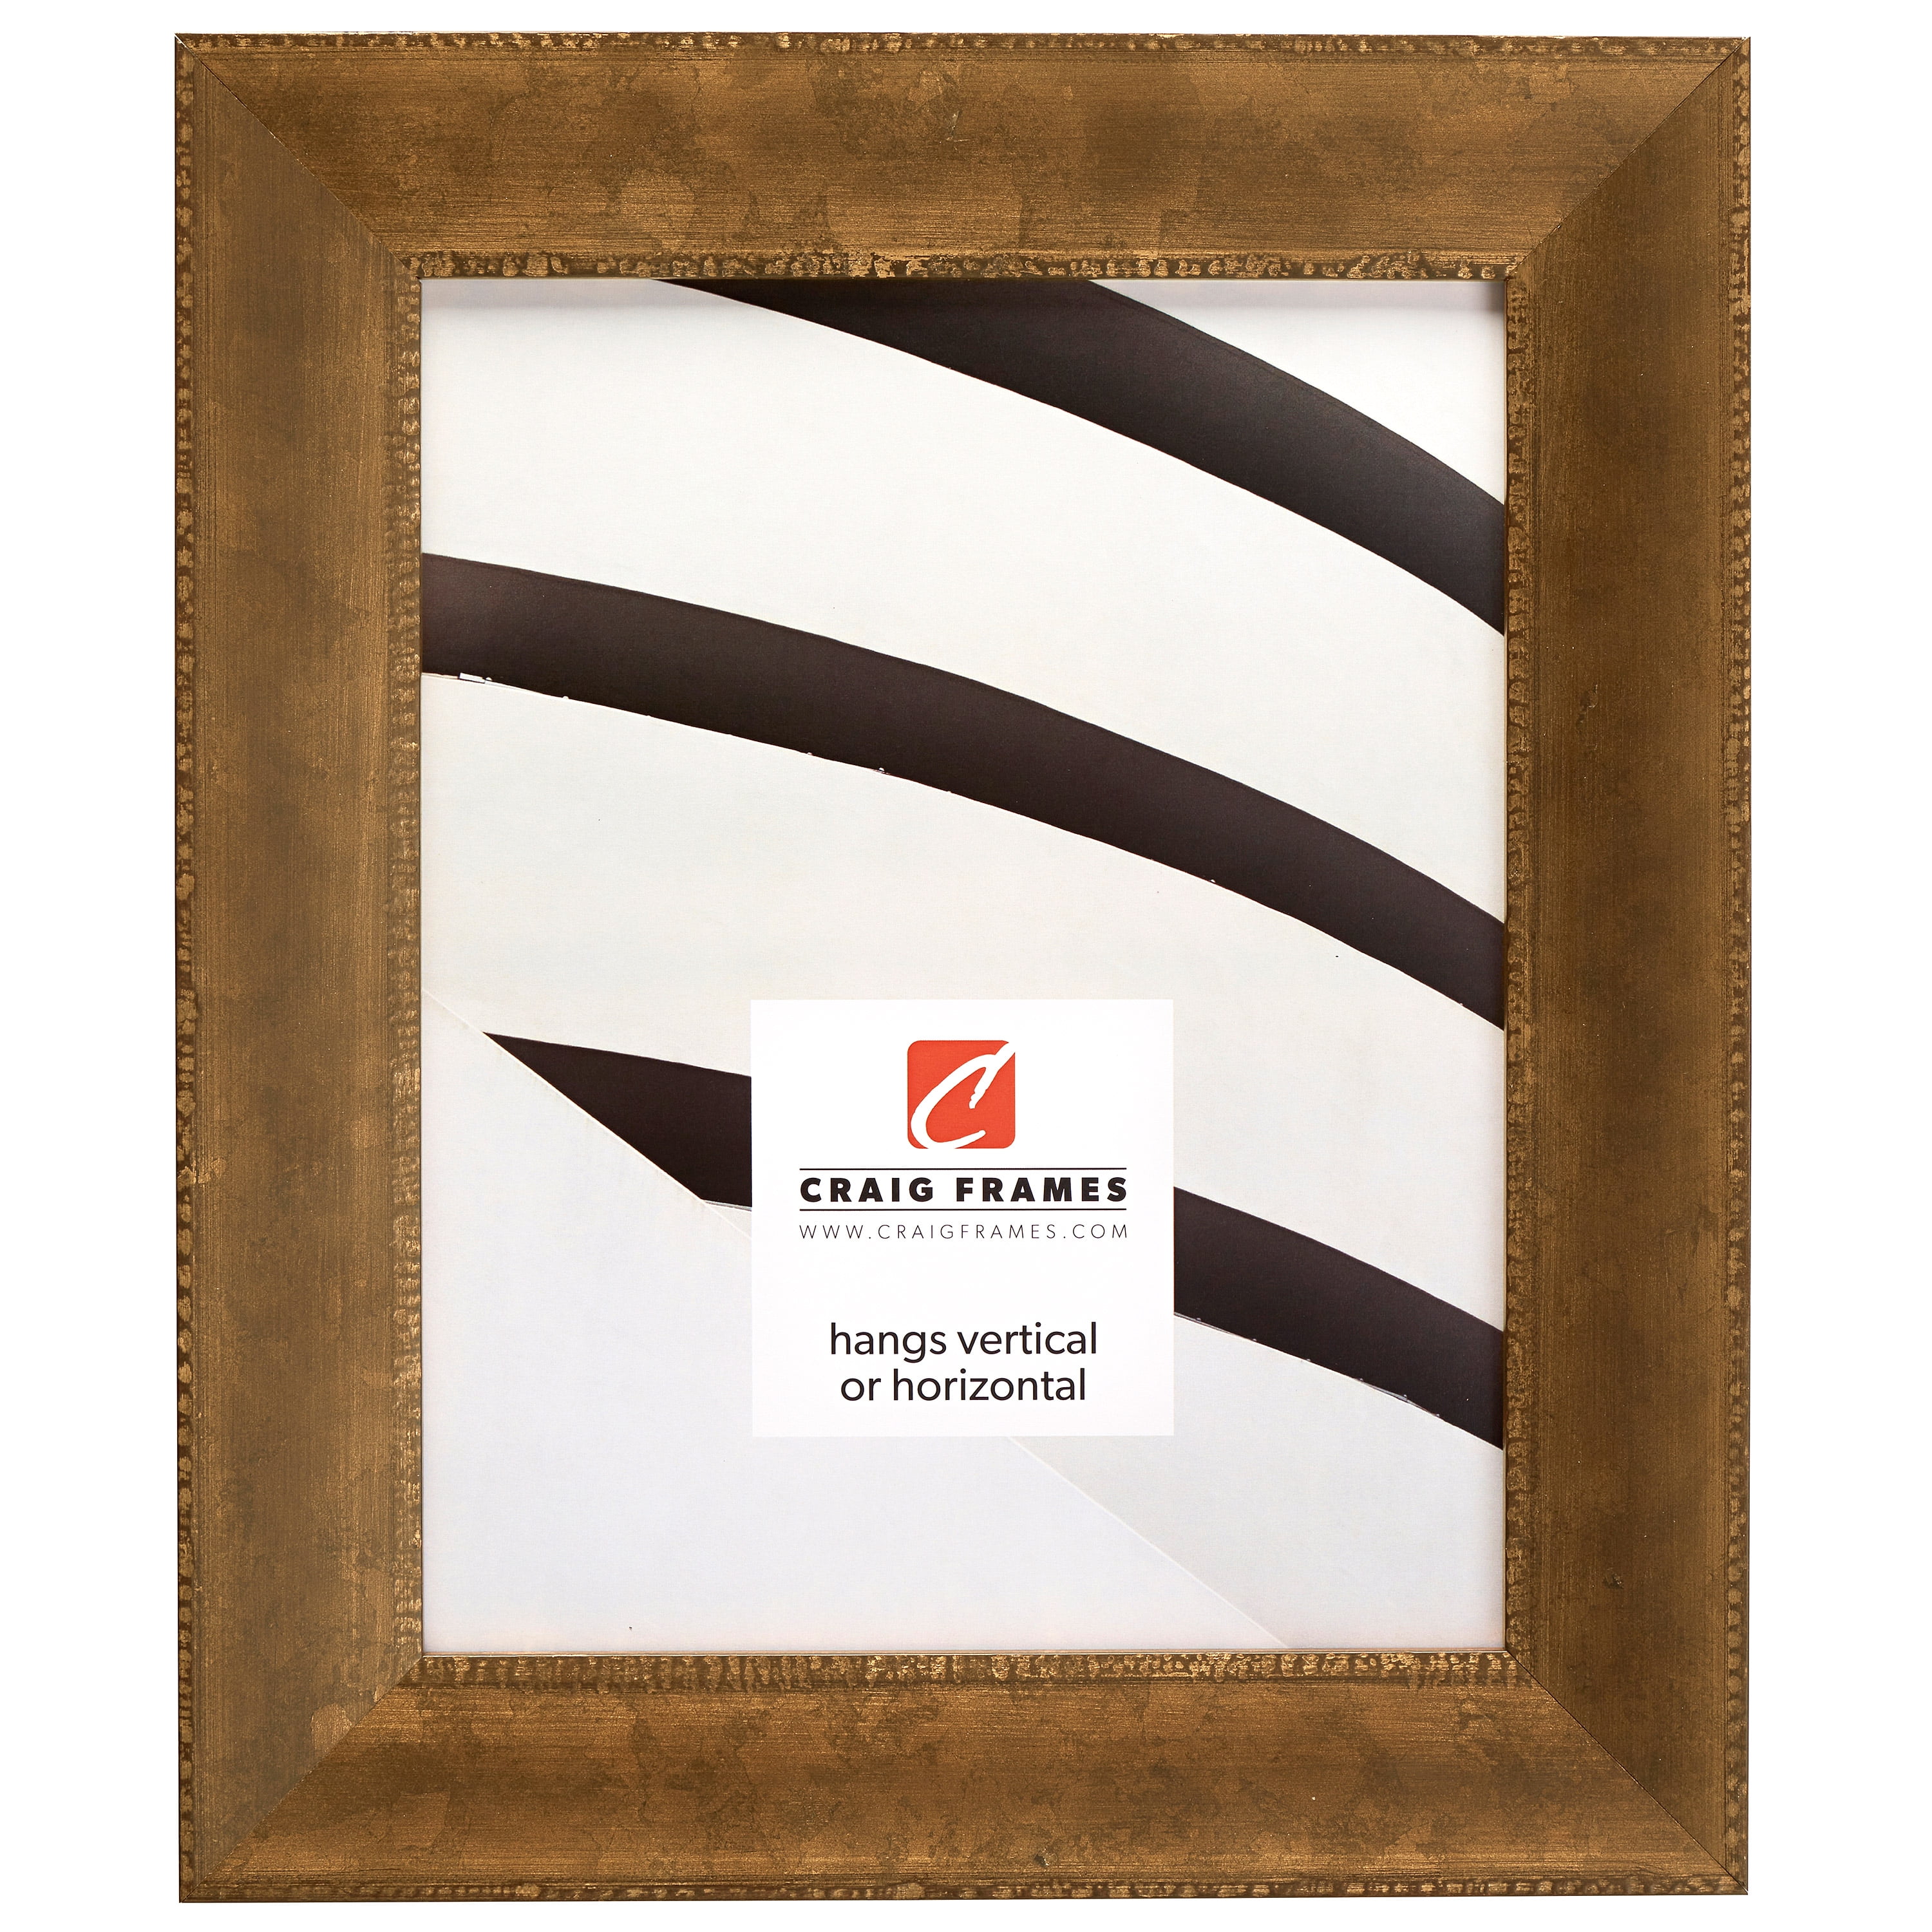 Craig Frames Patina 175 10 x 13 Inch Picture Frame Matted to Display a 7 x 10 Inch Photo Distressed Copper and Black